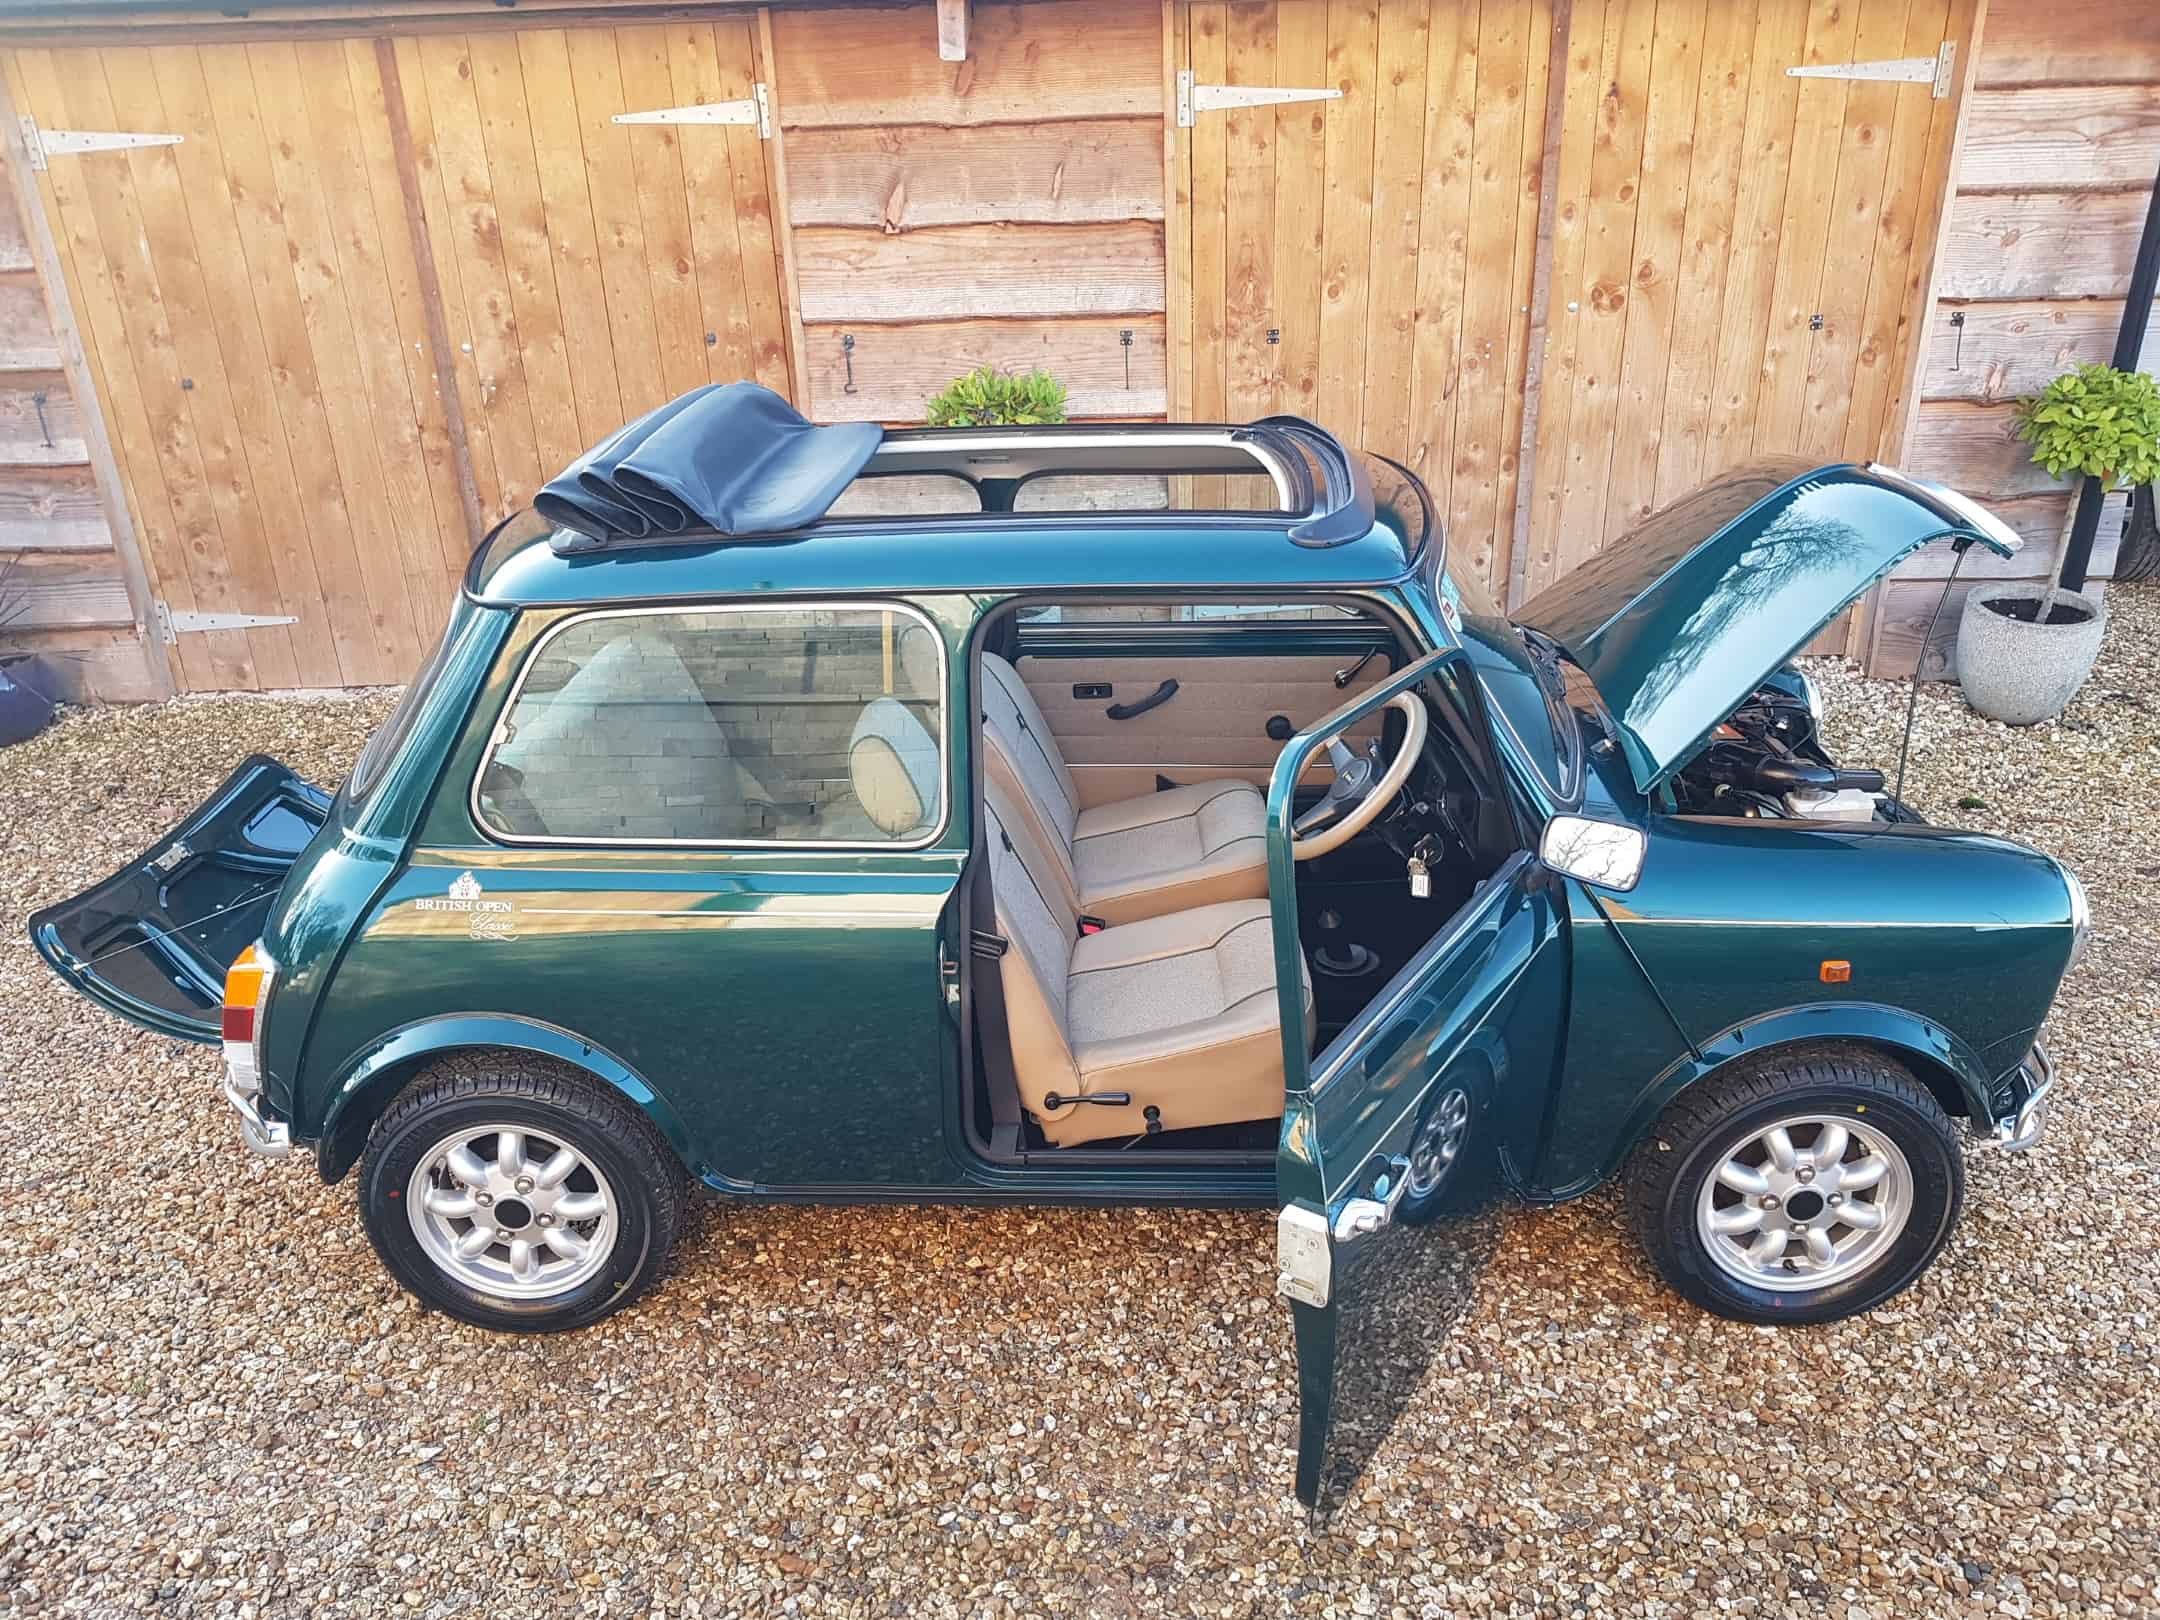 ** NOW SOLD ** 1992 Limited Edition Mini British Open Classic On Just 5900 Miles From New!